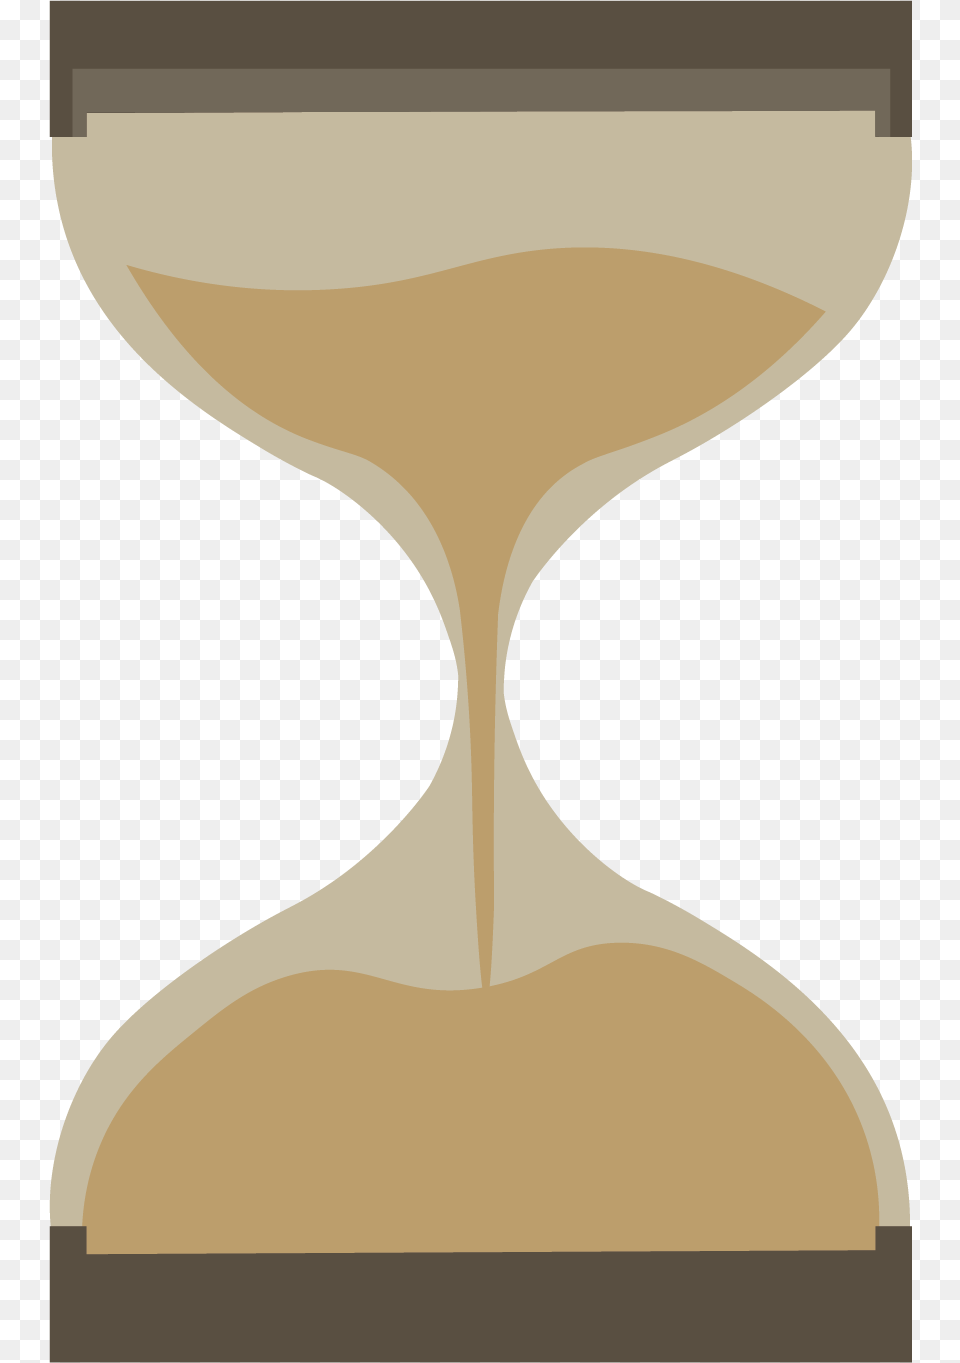 Sand Timer 2d, Hourglass Free Png Download